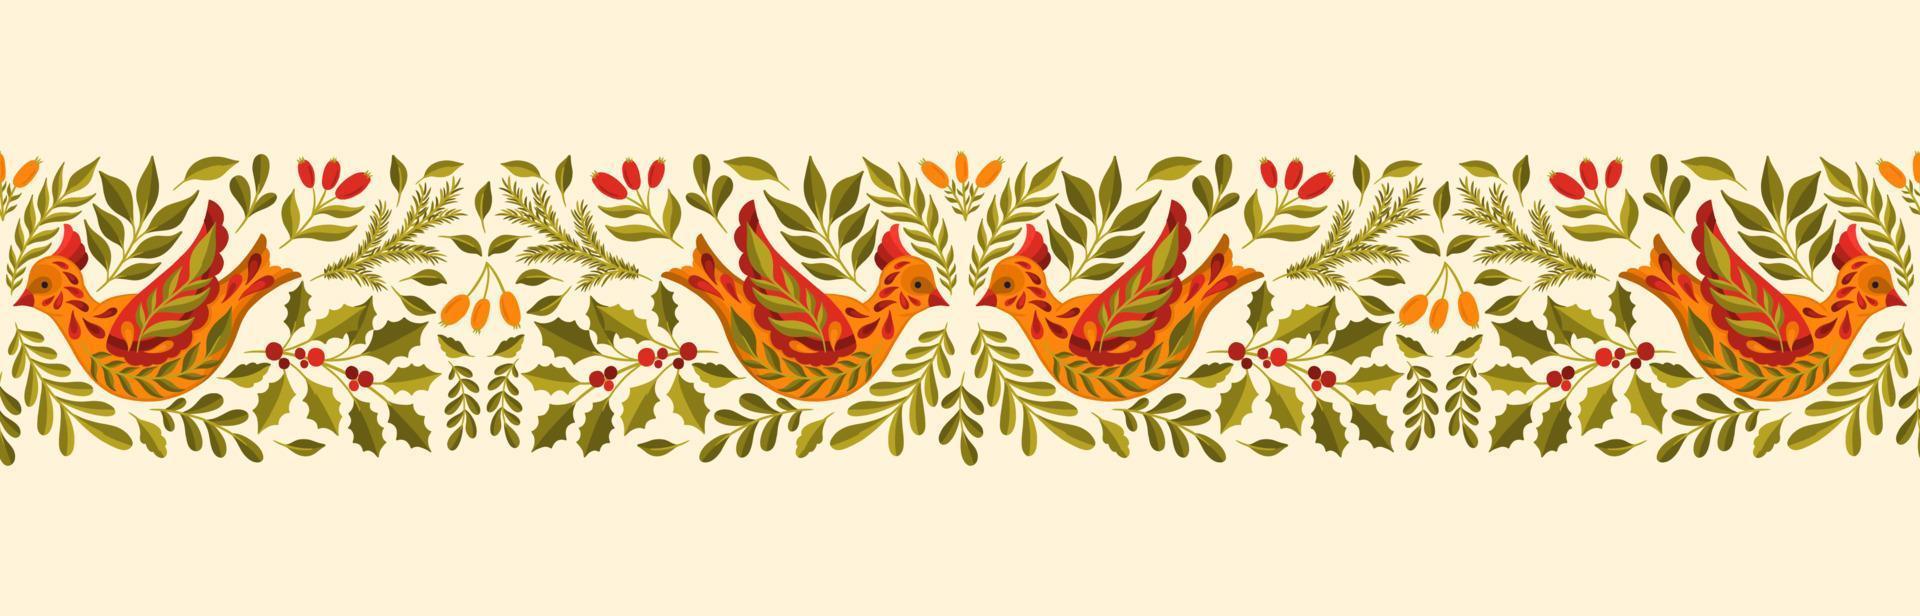 Seamless border ornament Christmas holiday.Bird and plant floral decoration. vector